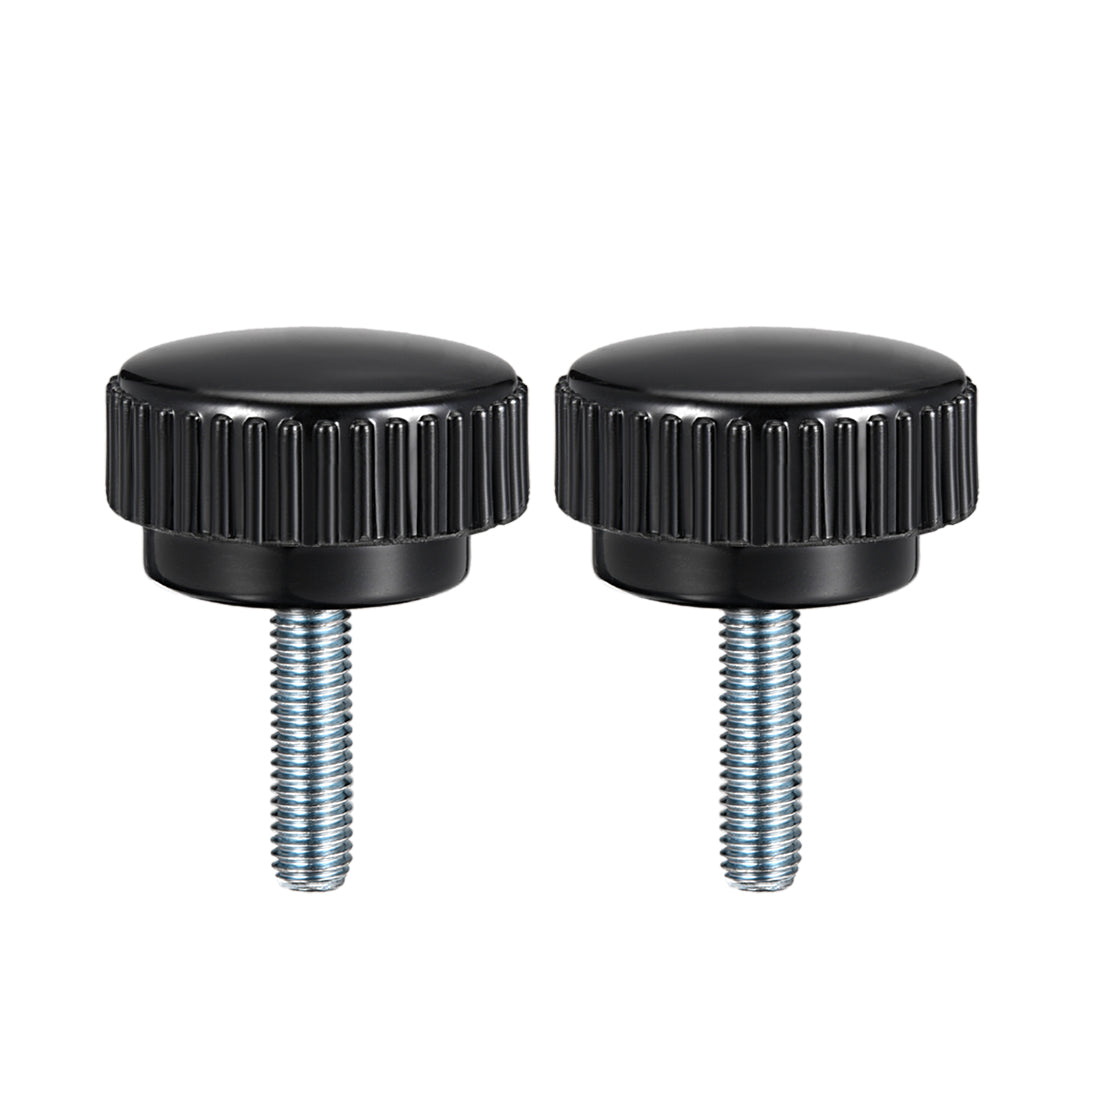 uxcell Uxcell M8 x 20mm Male Thread Knurled Clamping Knobs Grip Thumb Screw on Type  2 Pcs